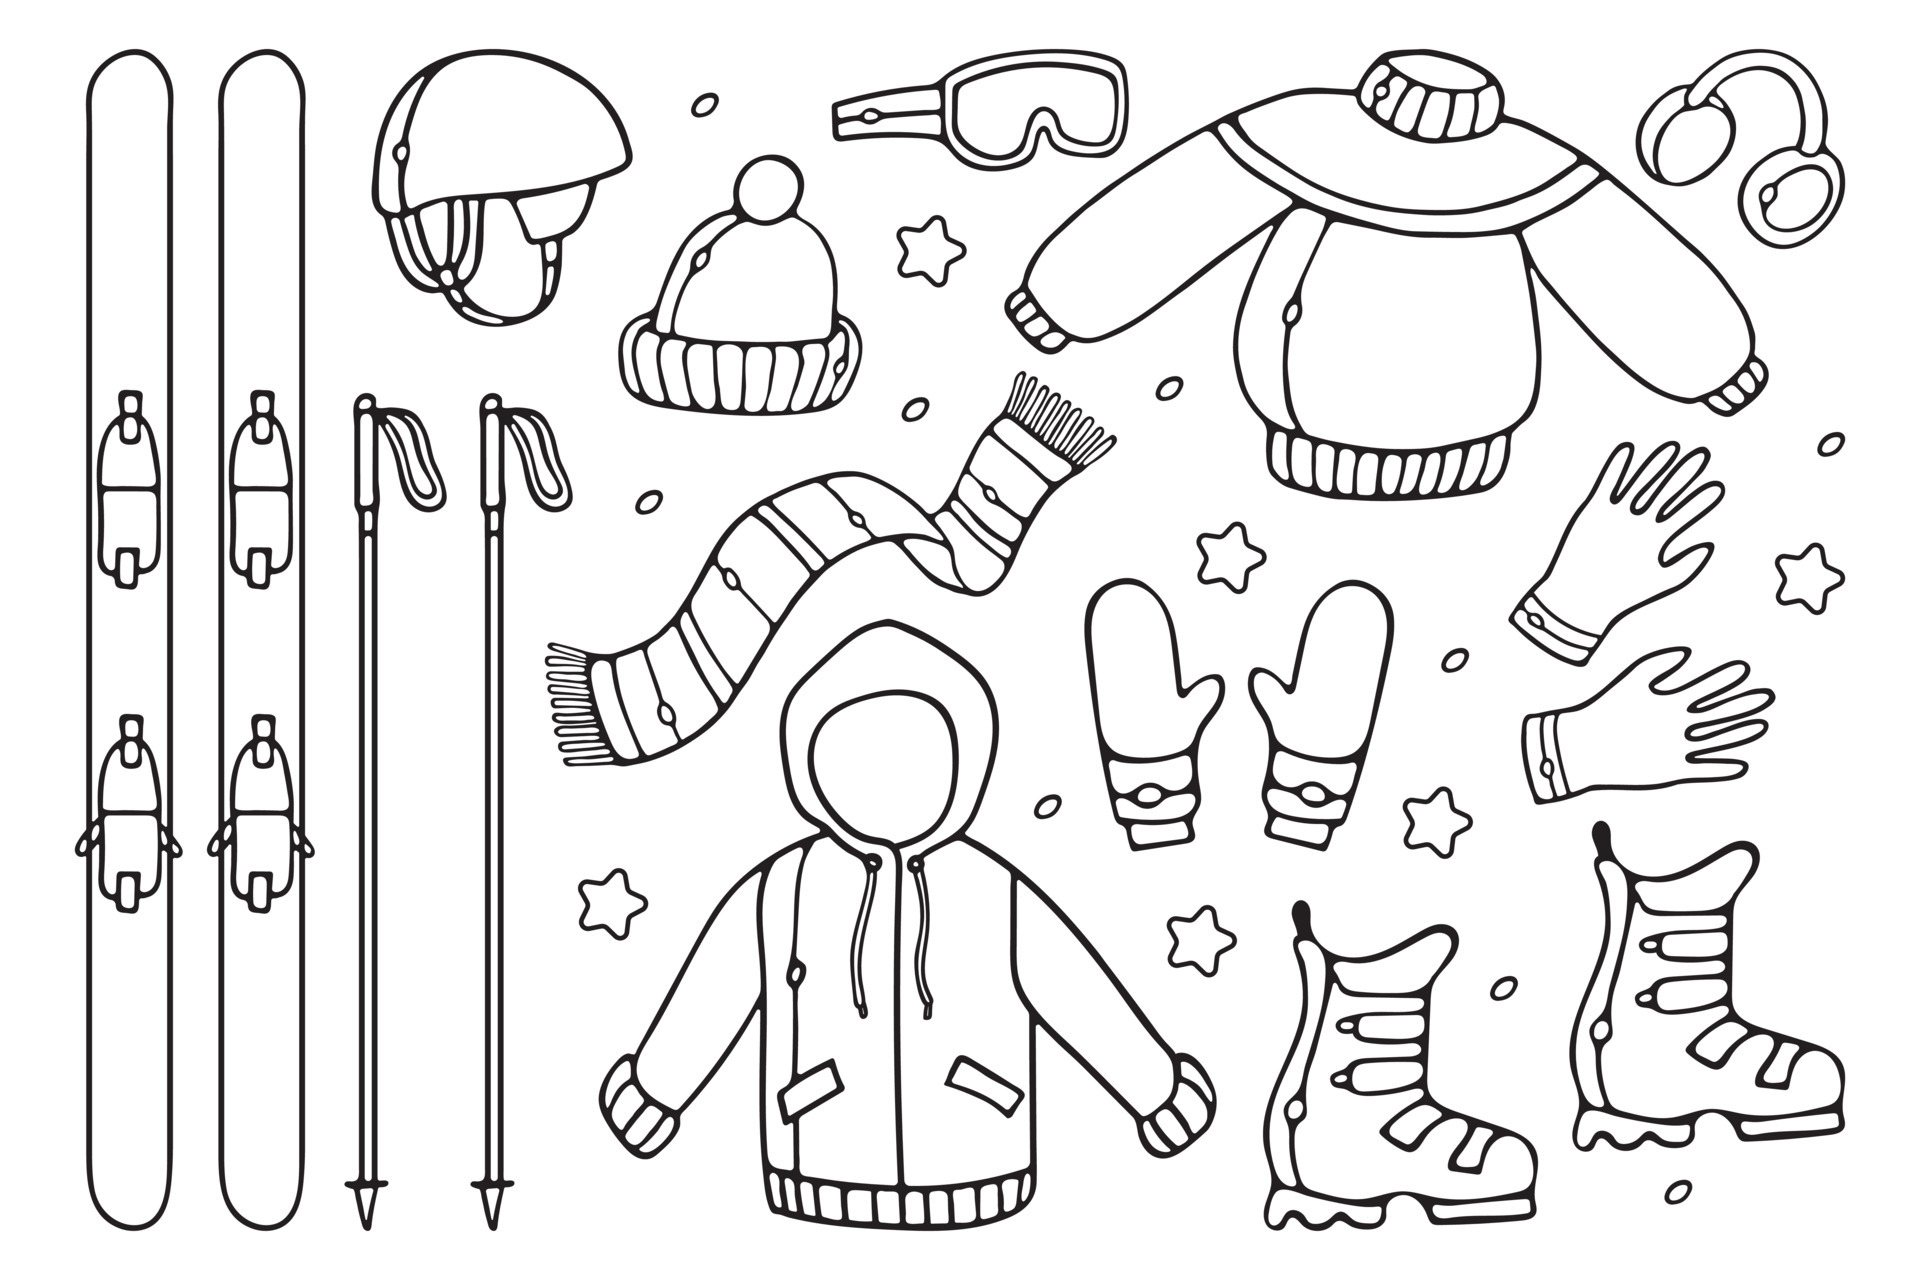 Skis Clipart Black And White Tree